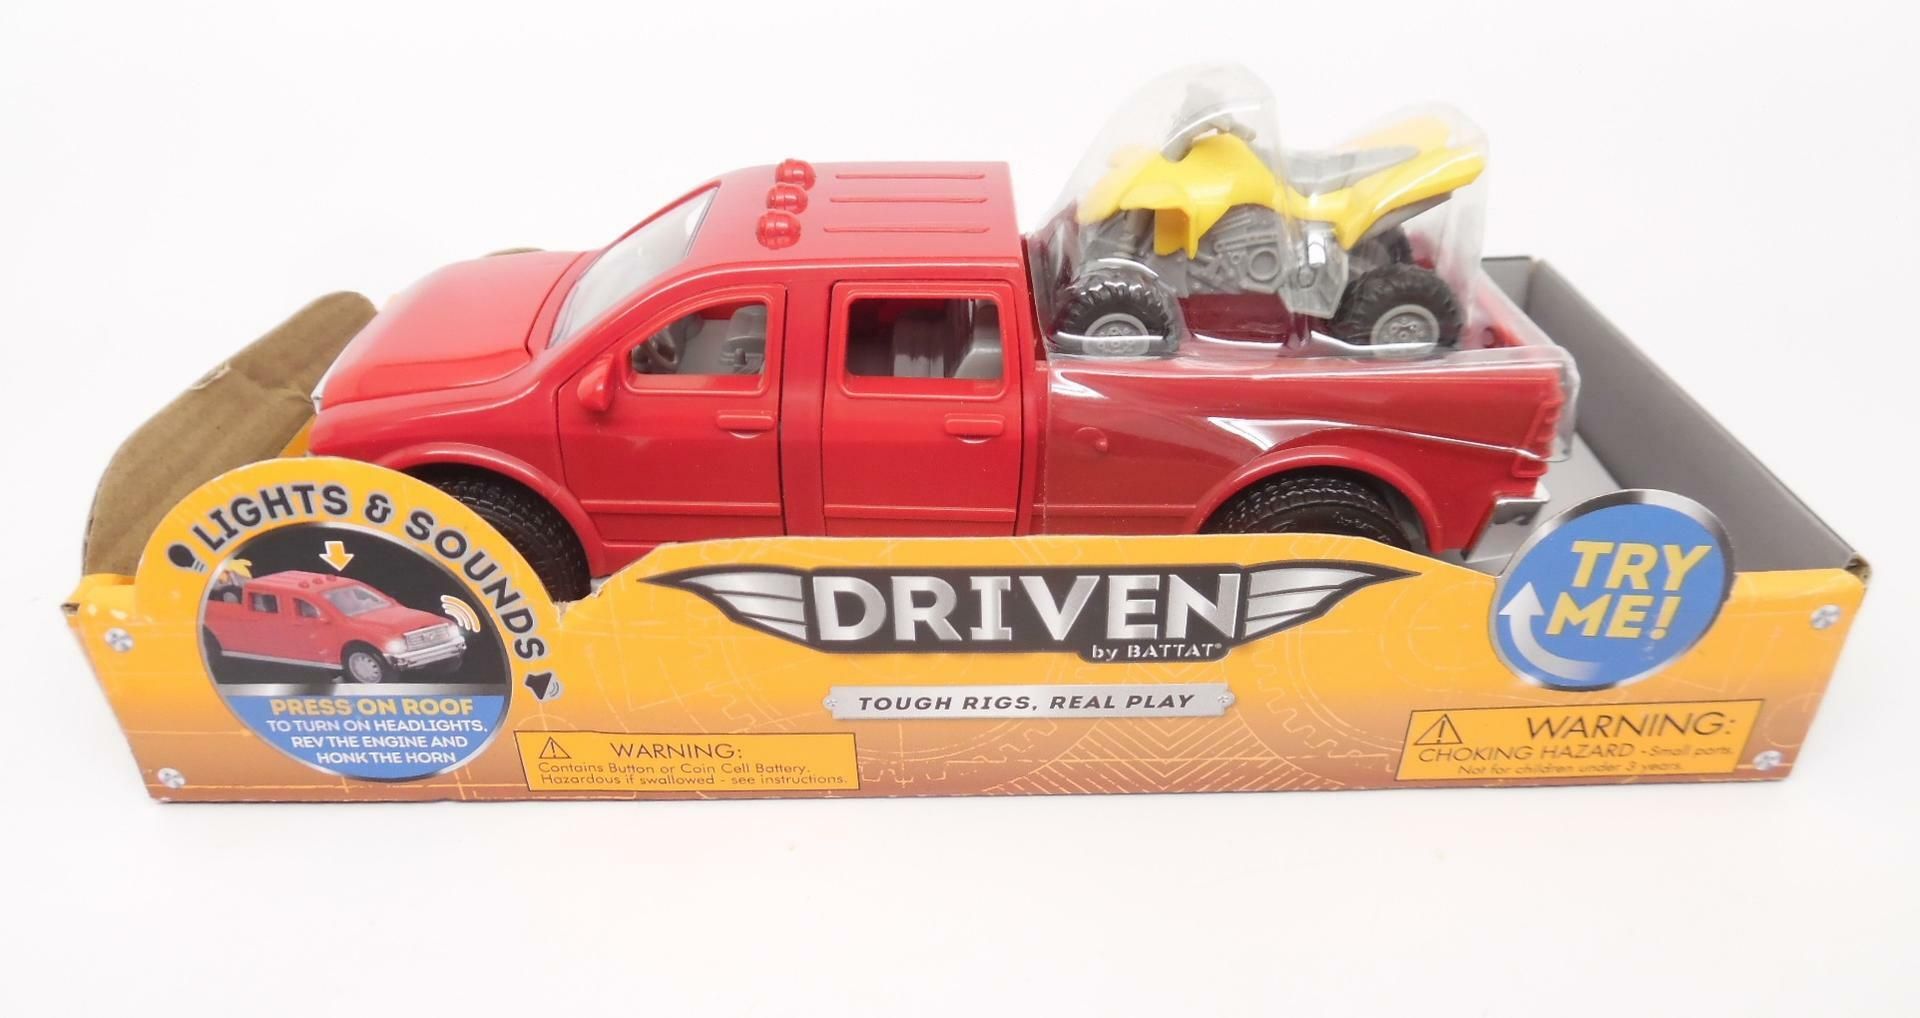 DRIVEN by Battat - Toy Pickup Truck with ATV - Micro Series - Lights & Sounds | Walmart (US)